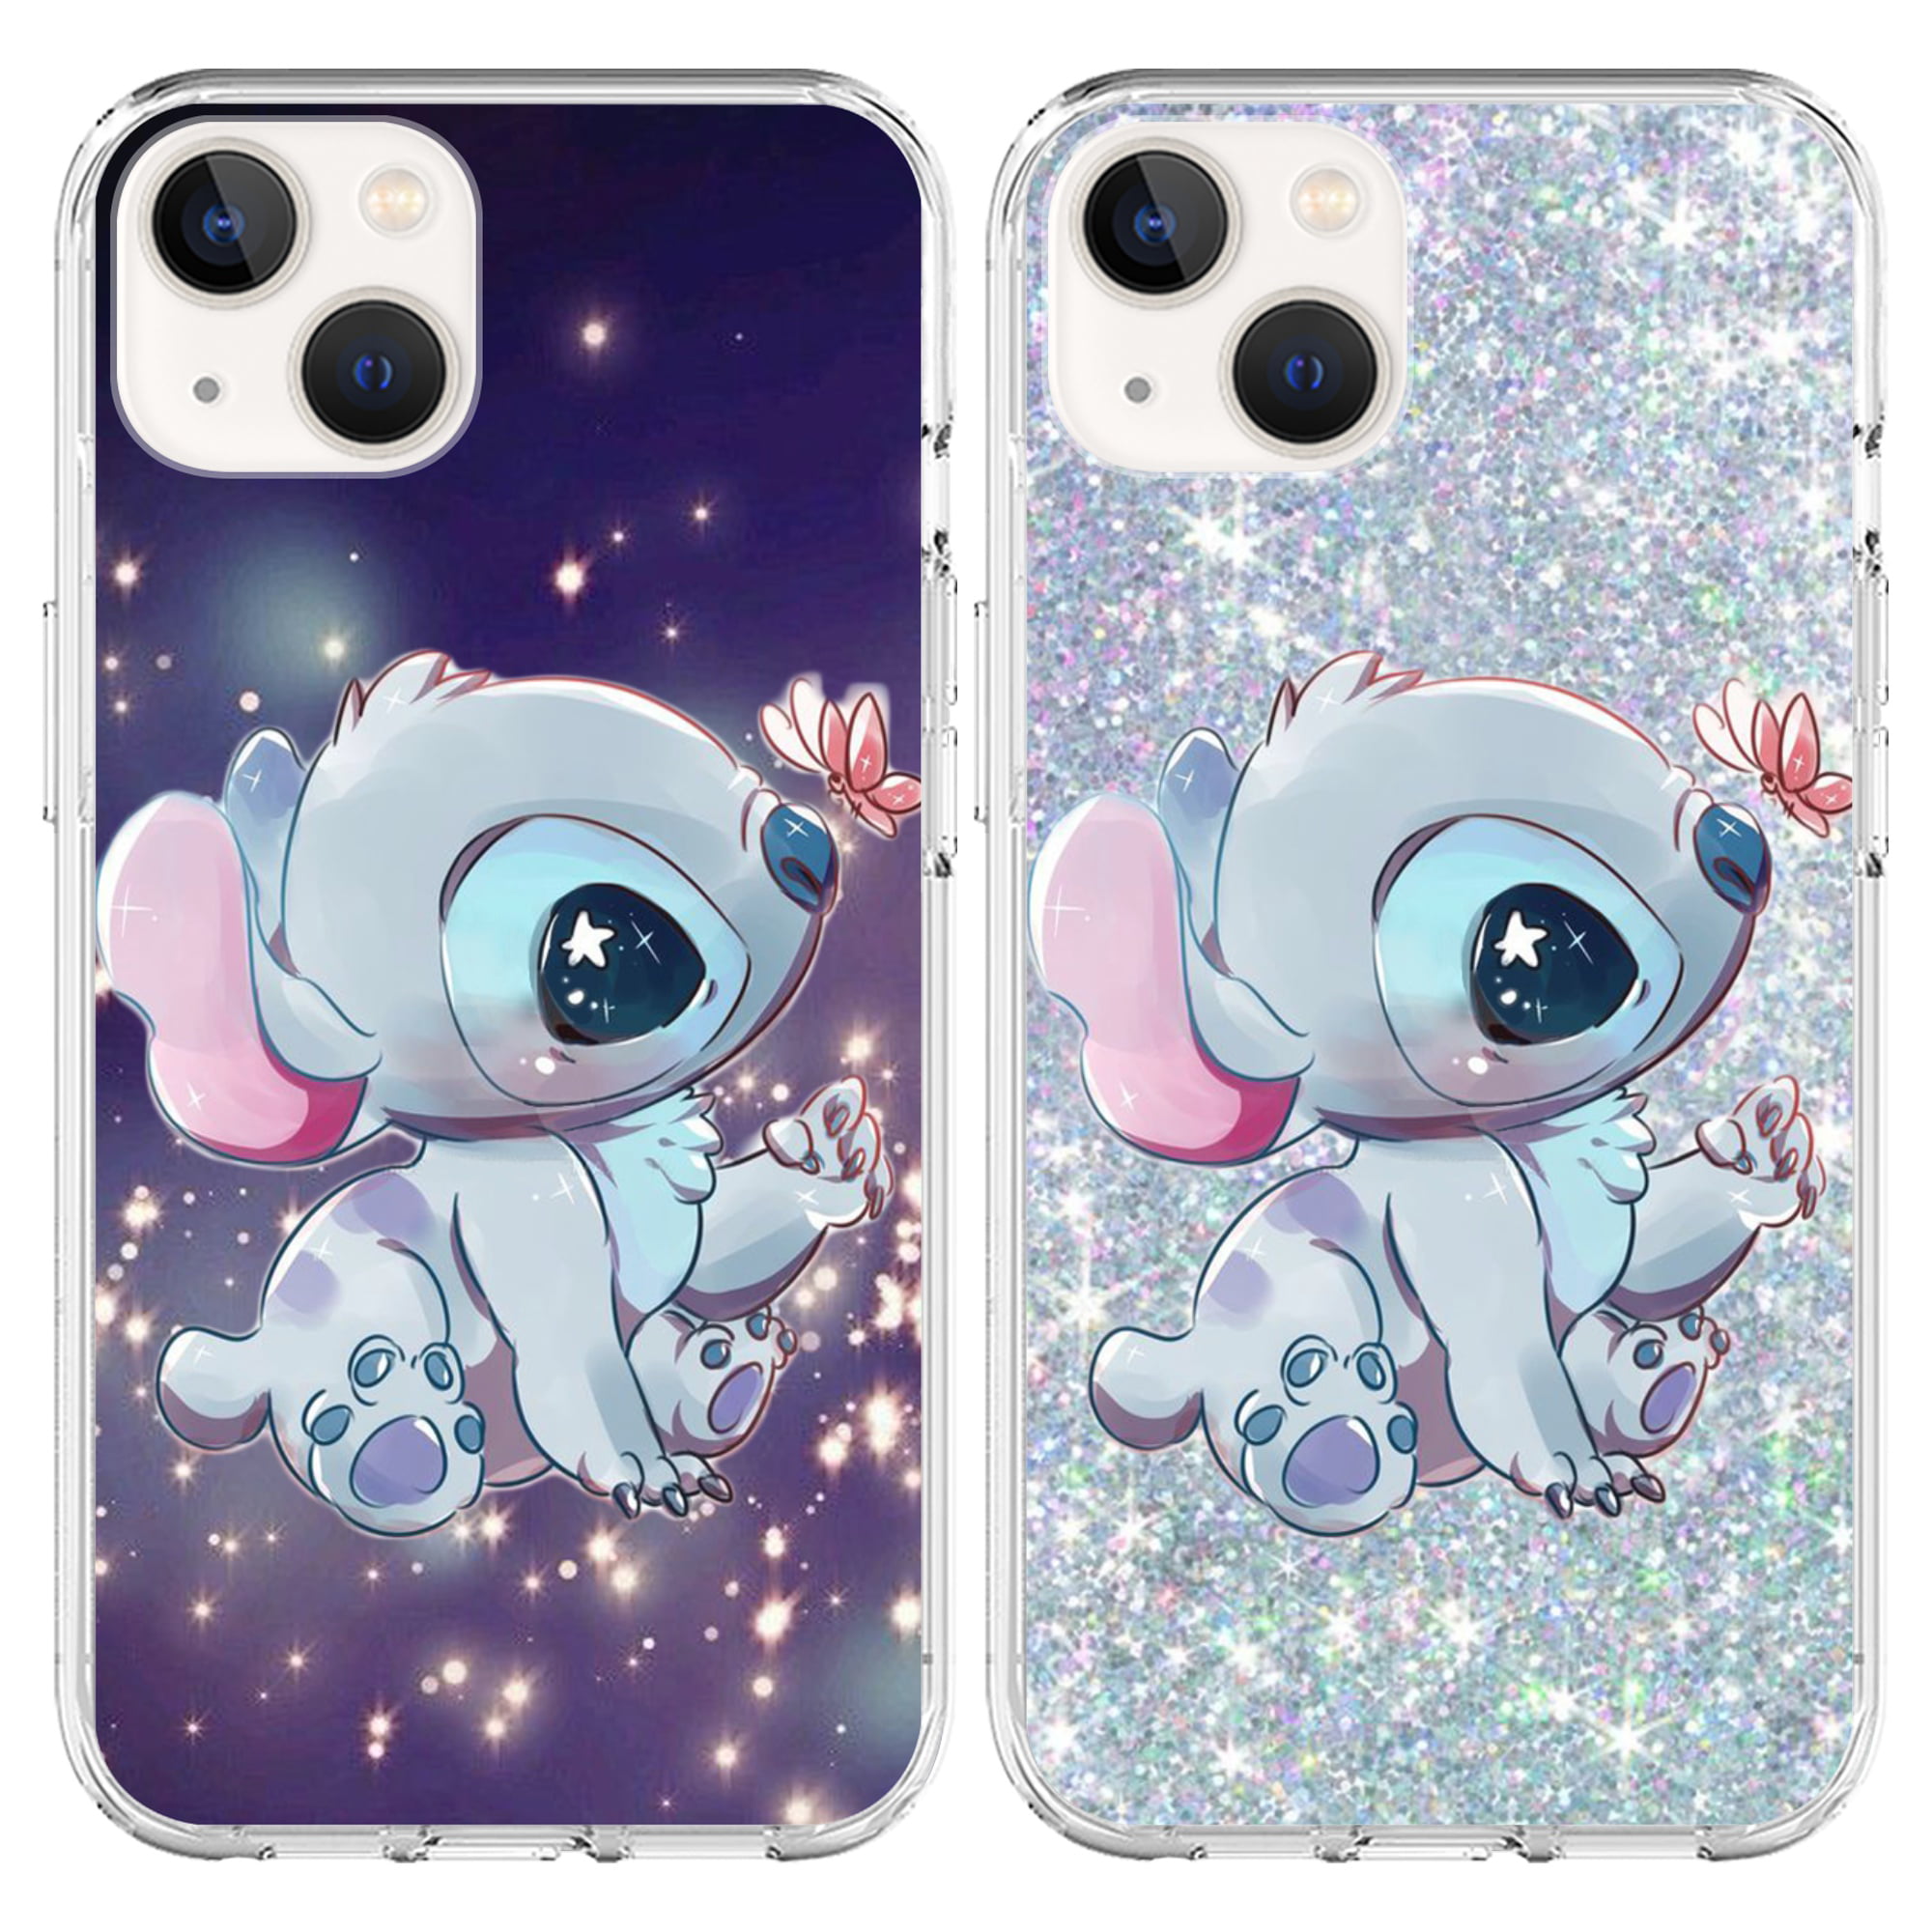 Morning exercises Of storm preface for Huawei Mate 20 Case,Cute Stars Stitch Case for Huawei Mate 10 Pro 10  Lite/Mate 20 20 Lite 20 Pro/Mate 30 30 Lite 30 Pro/Mate 9 Mate SE/Nova 3i 5  Plus 3e